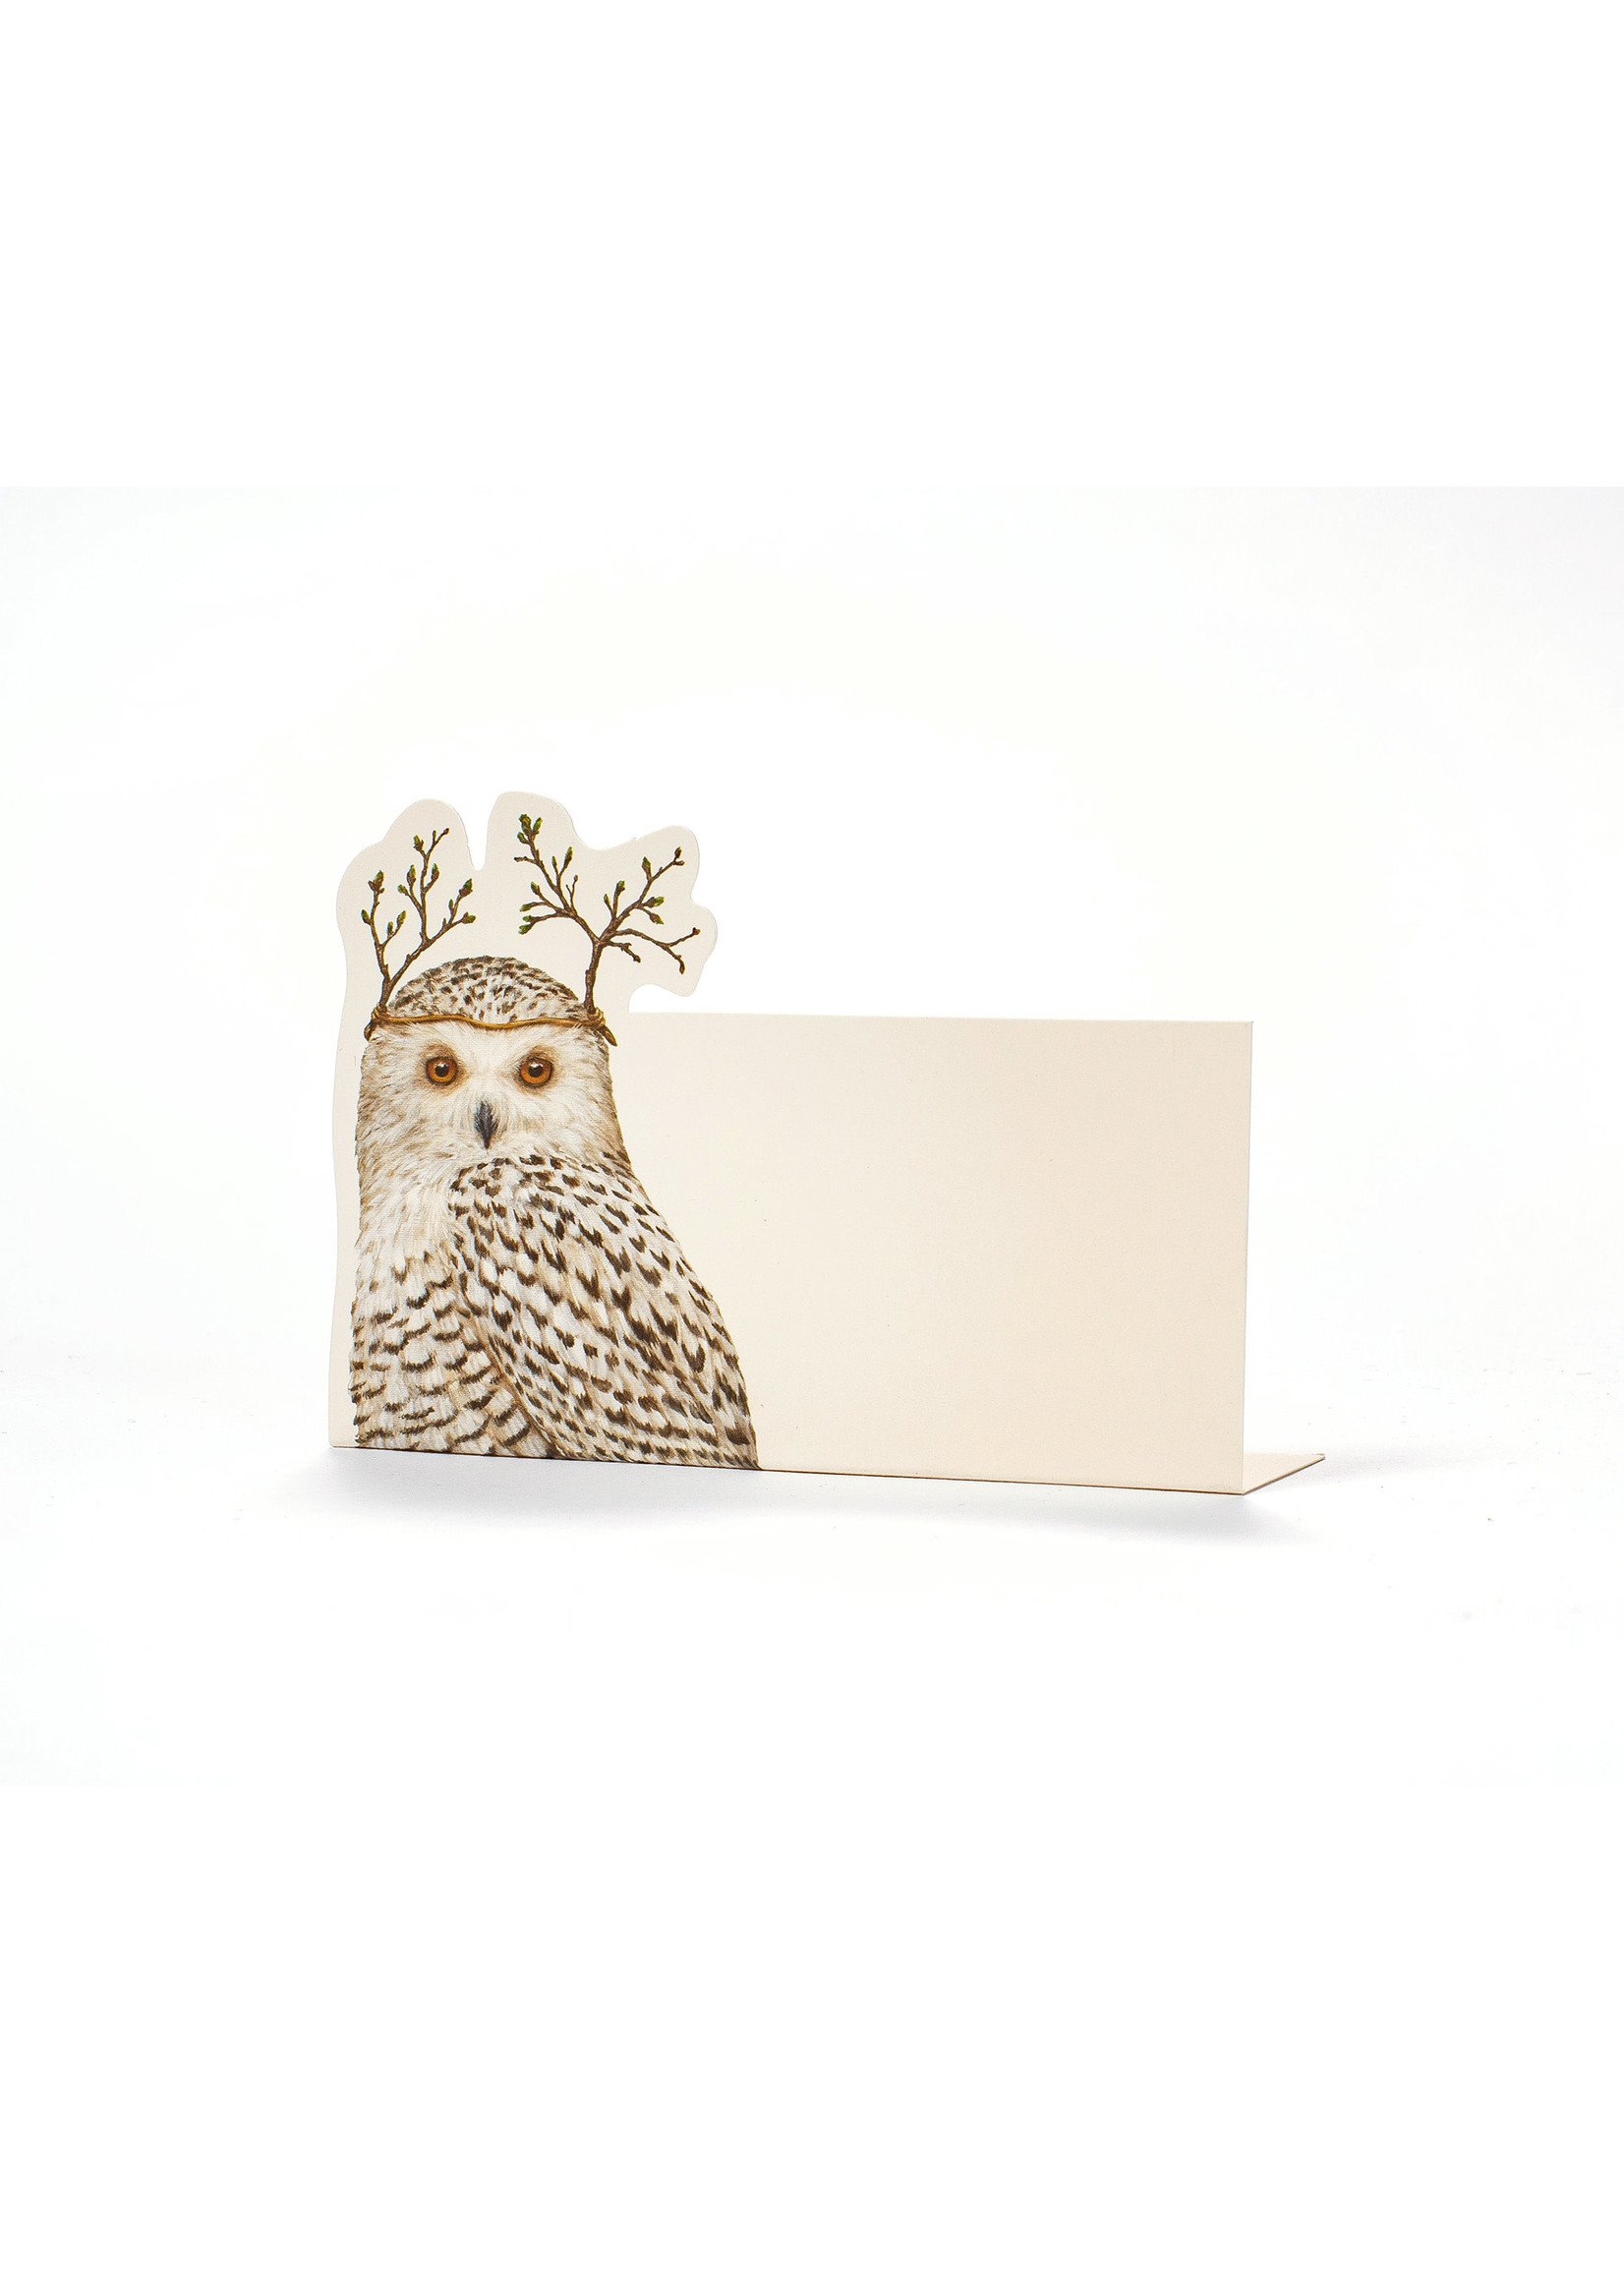 Hester & Cook Place Cards - Winter Owl (pack of 12)